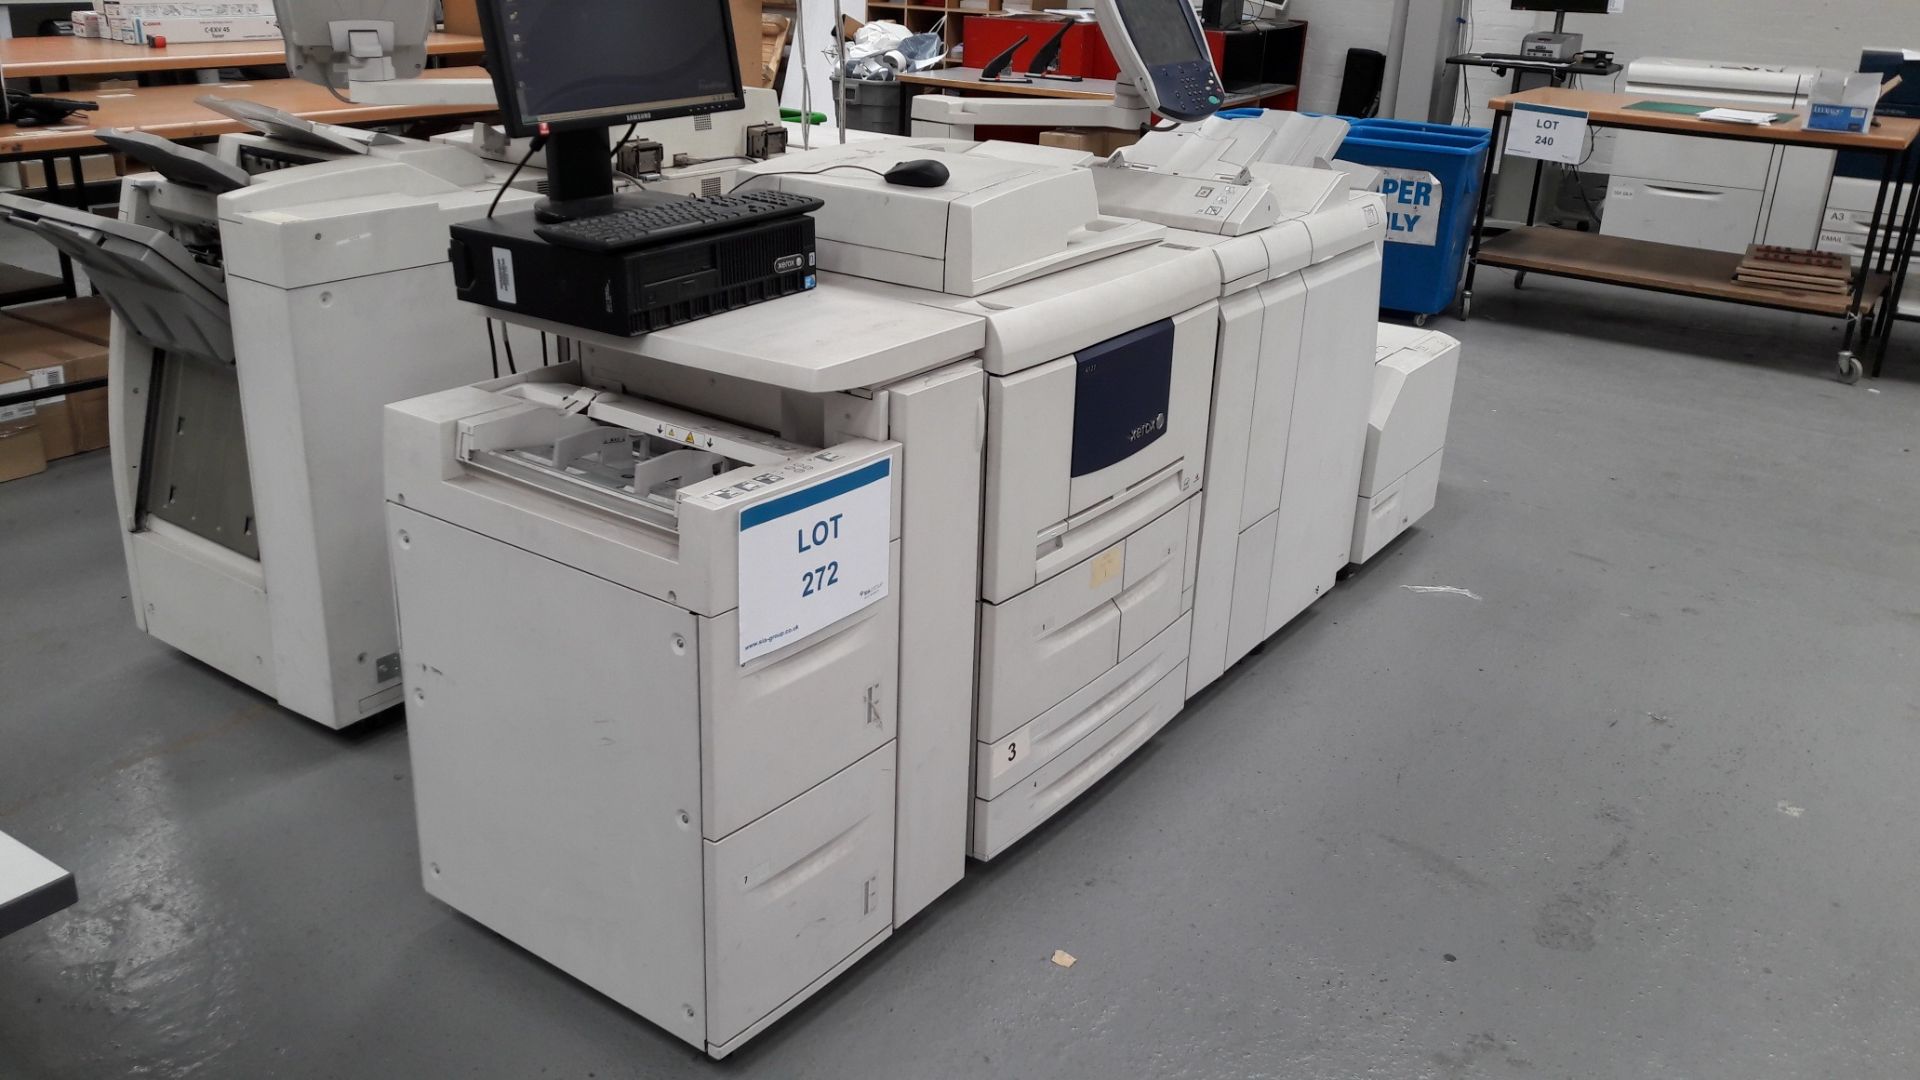 Xerox 4127 high speed copier printer with 7 drawers and 2 tray sorter - Image 4 of 6